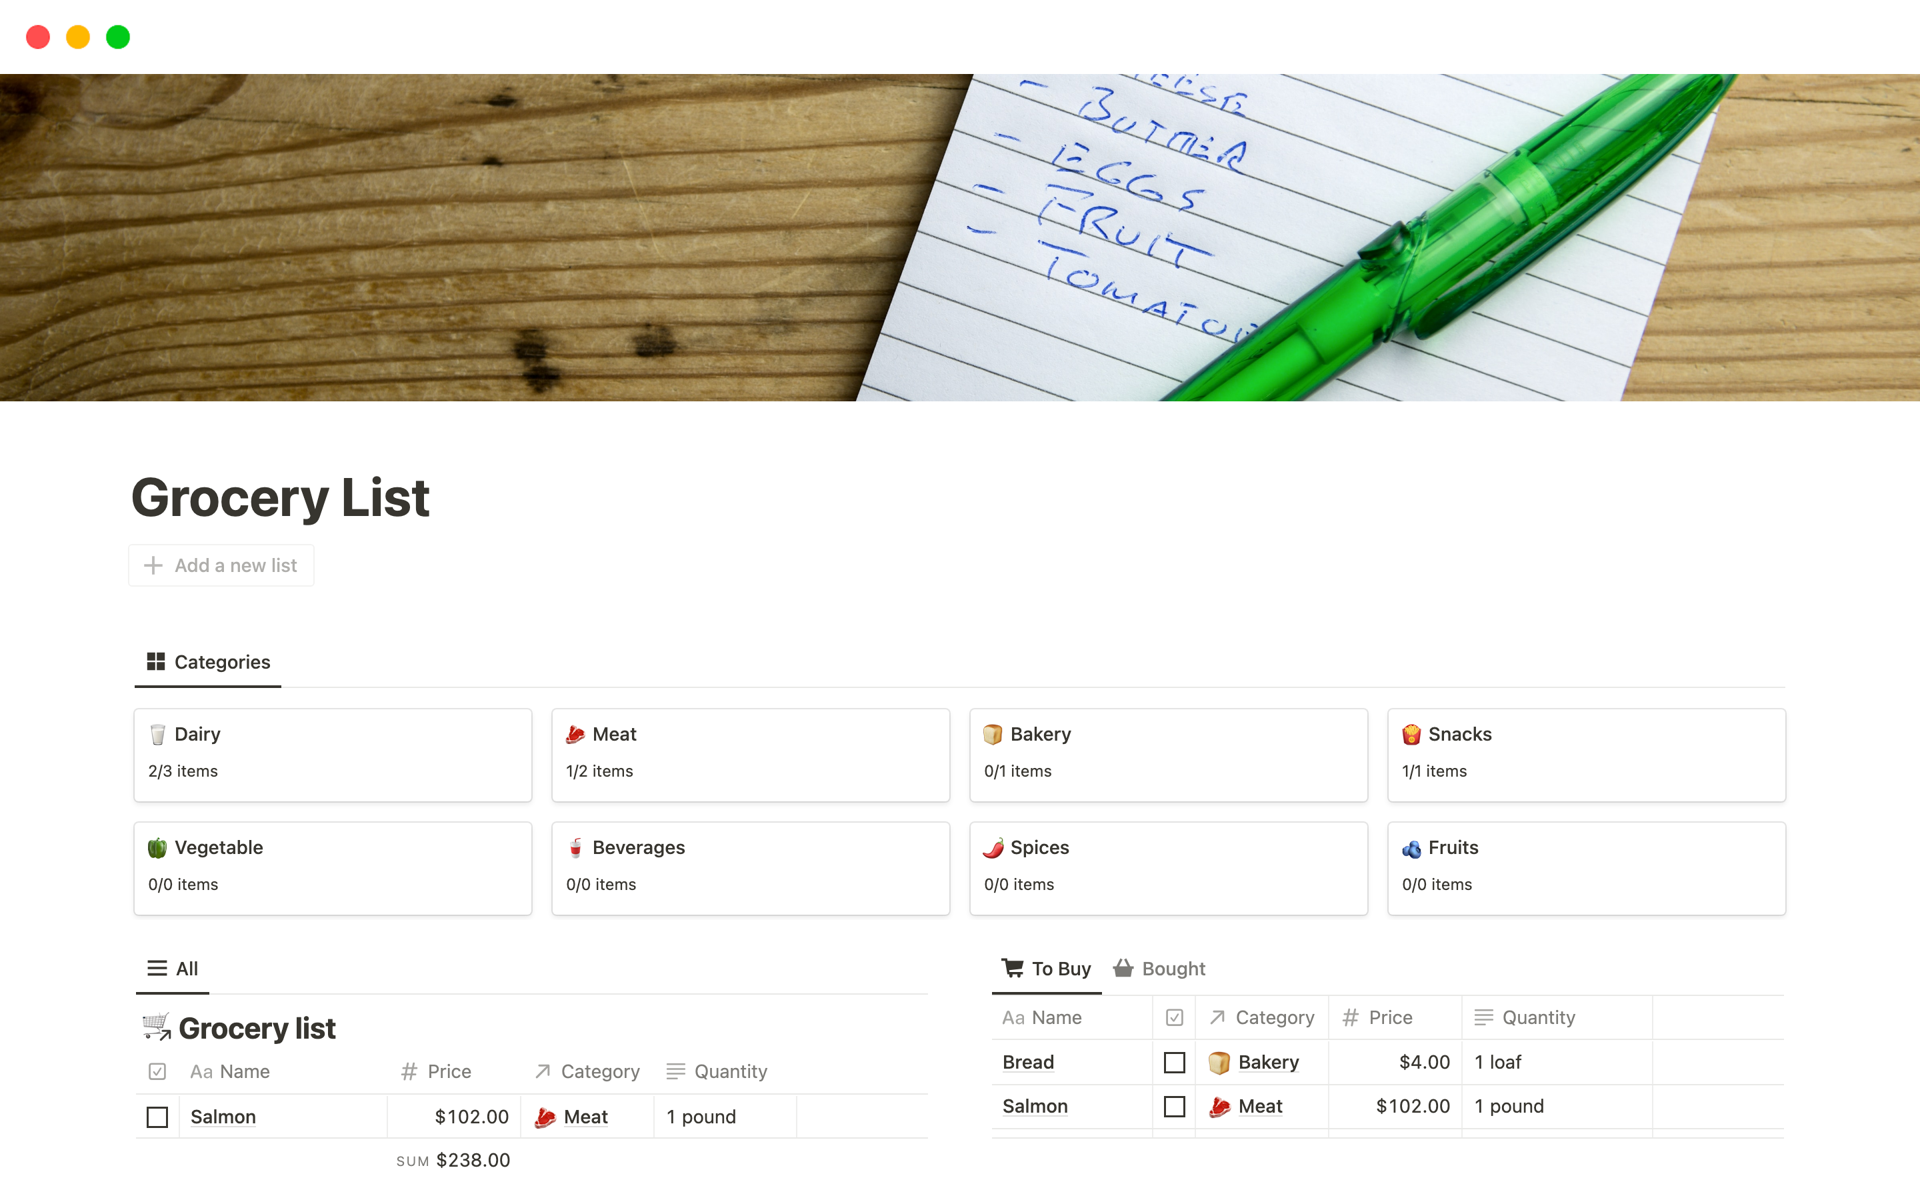 The Grocery List Notion Template is a tool that can help you create a grocery list, keep track of what you need to buy, what you've already bought, and how much you're spending